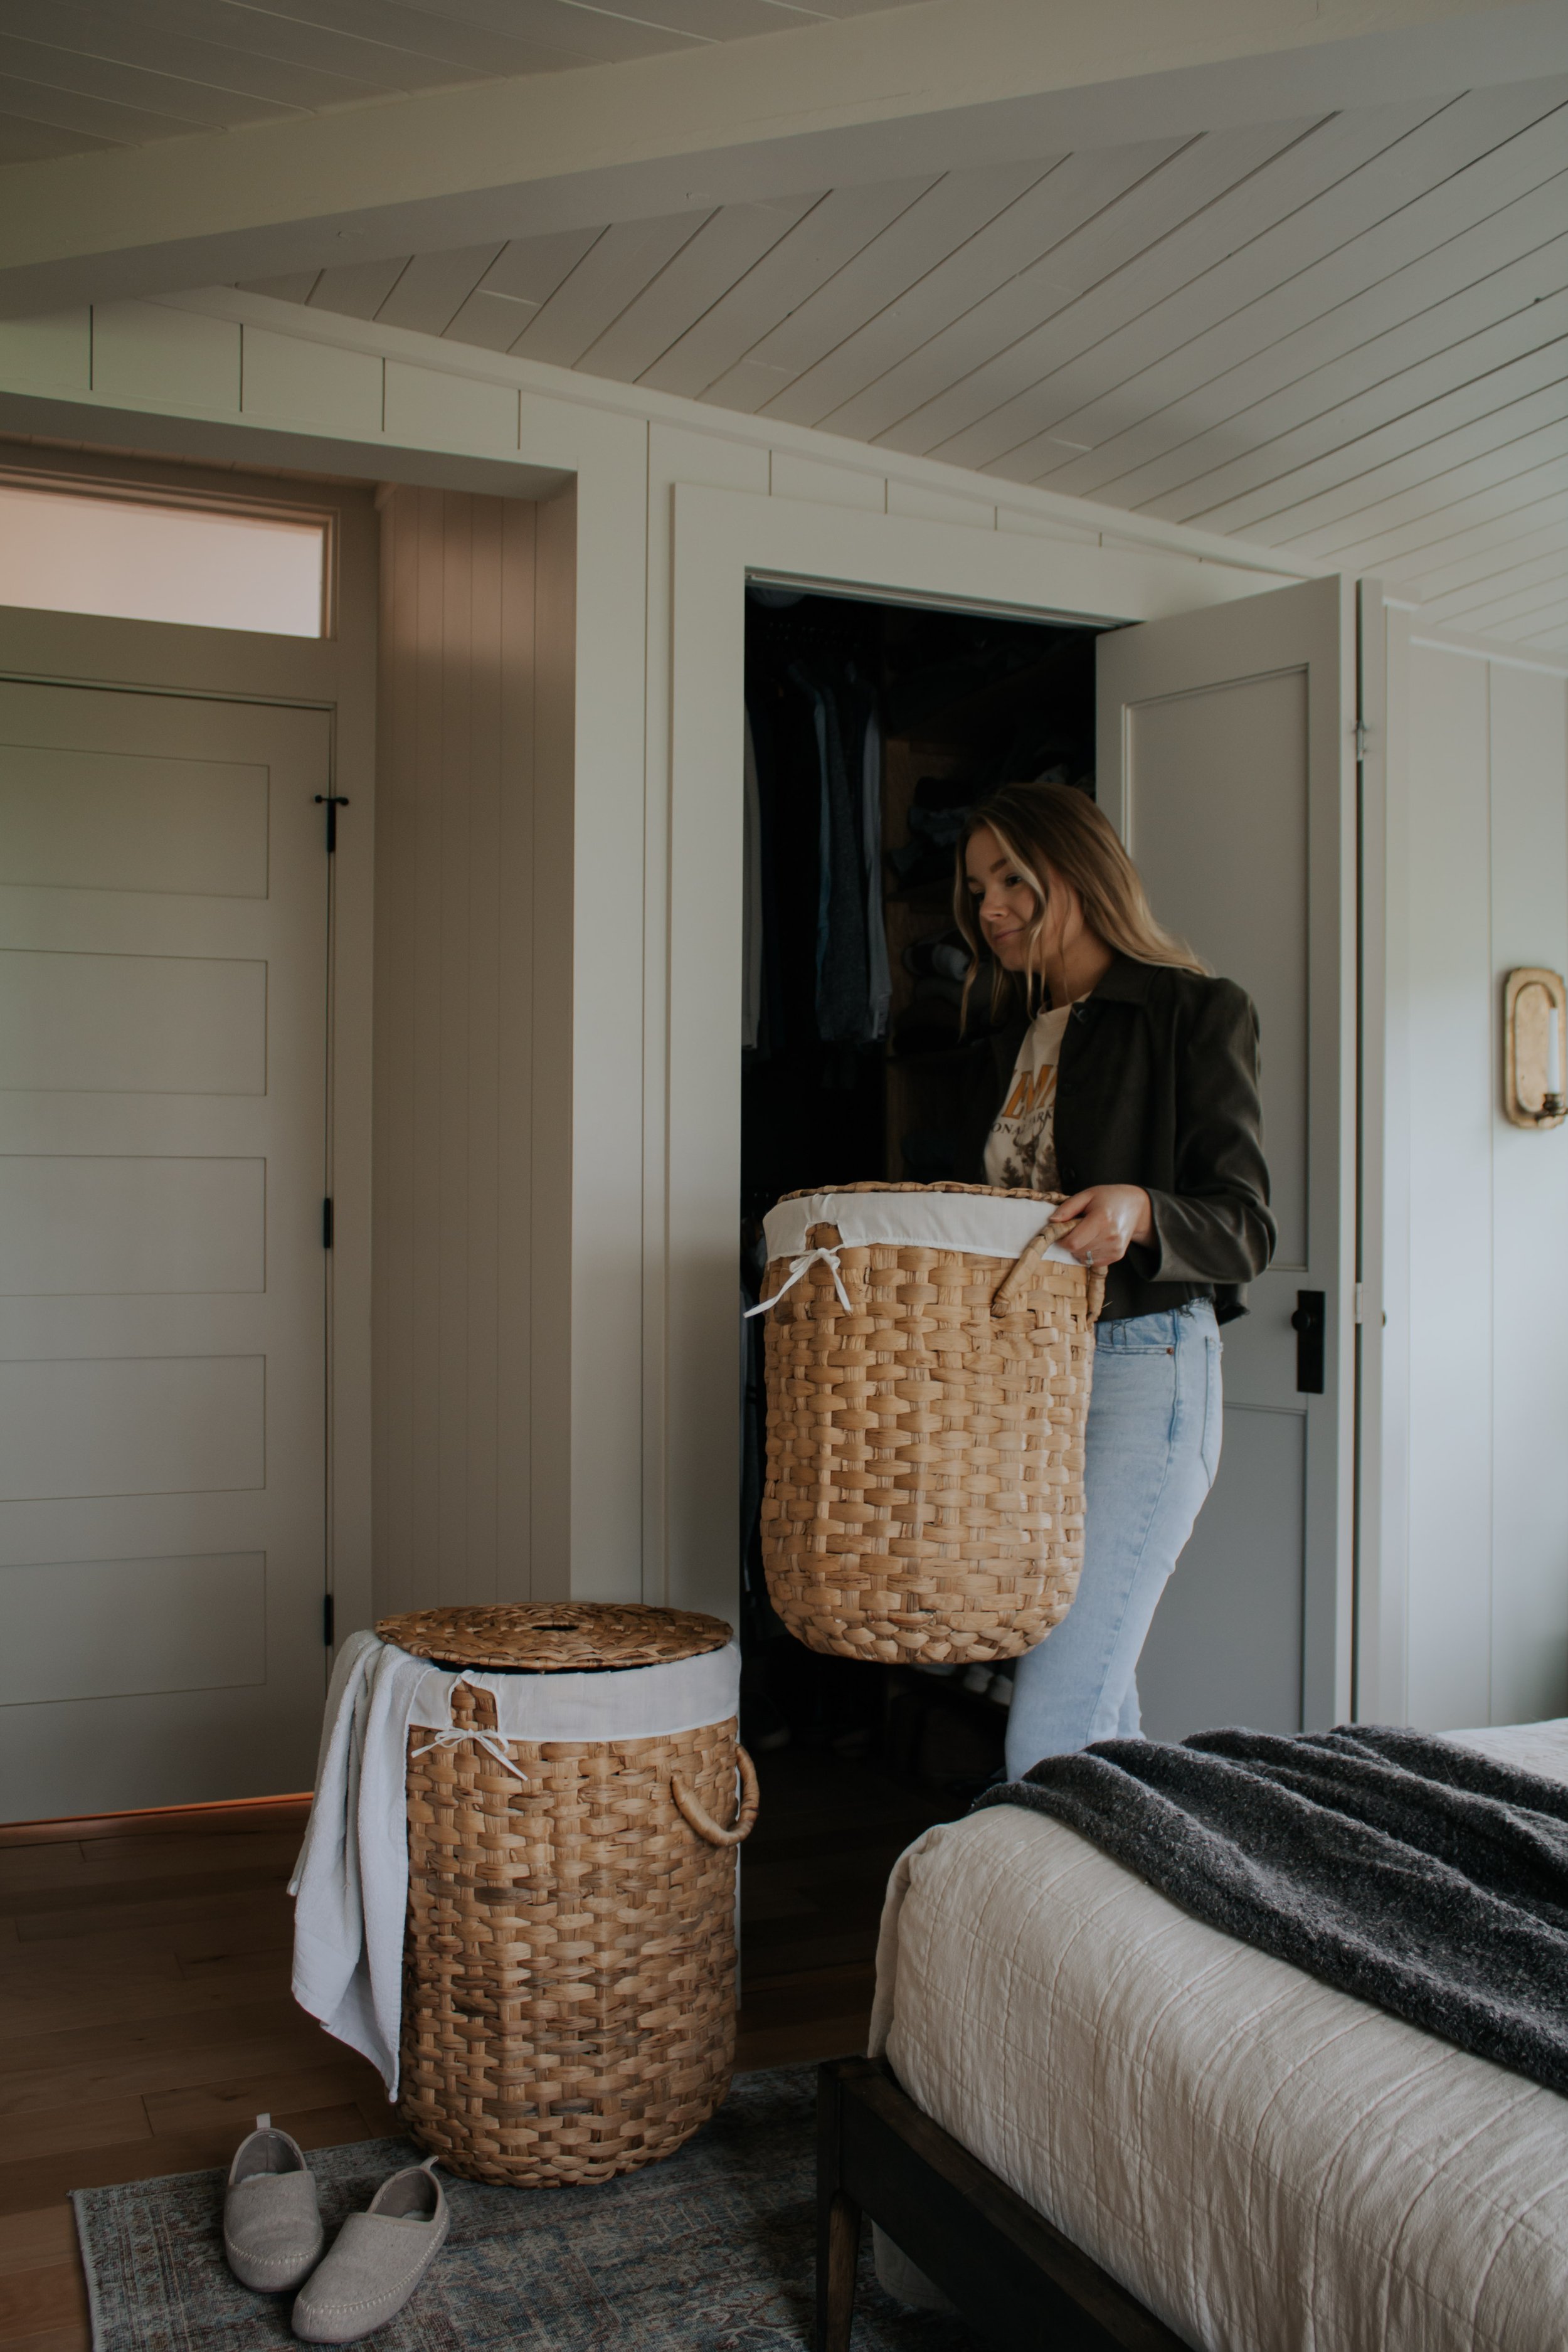 The 6 Best Laundry Baskets and Hampers of 2023